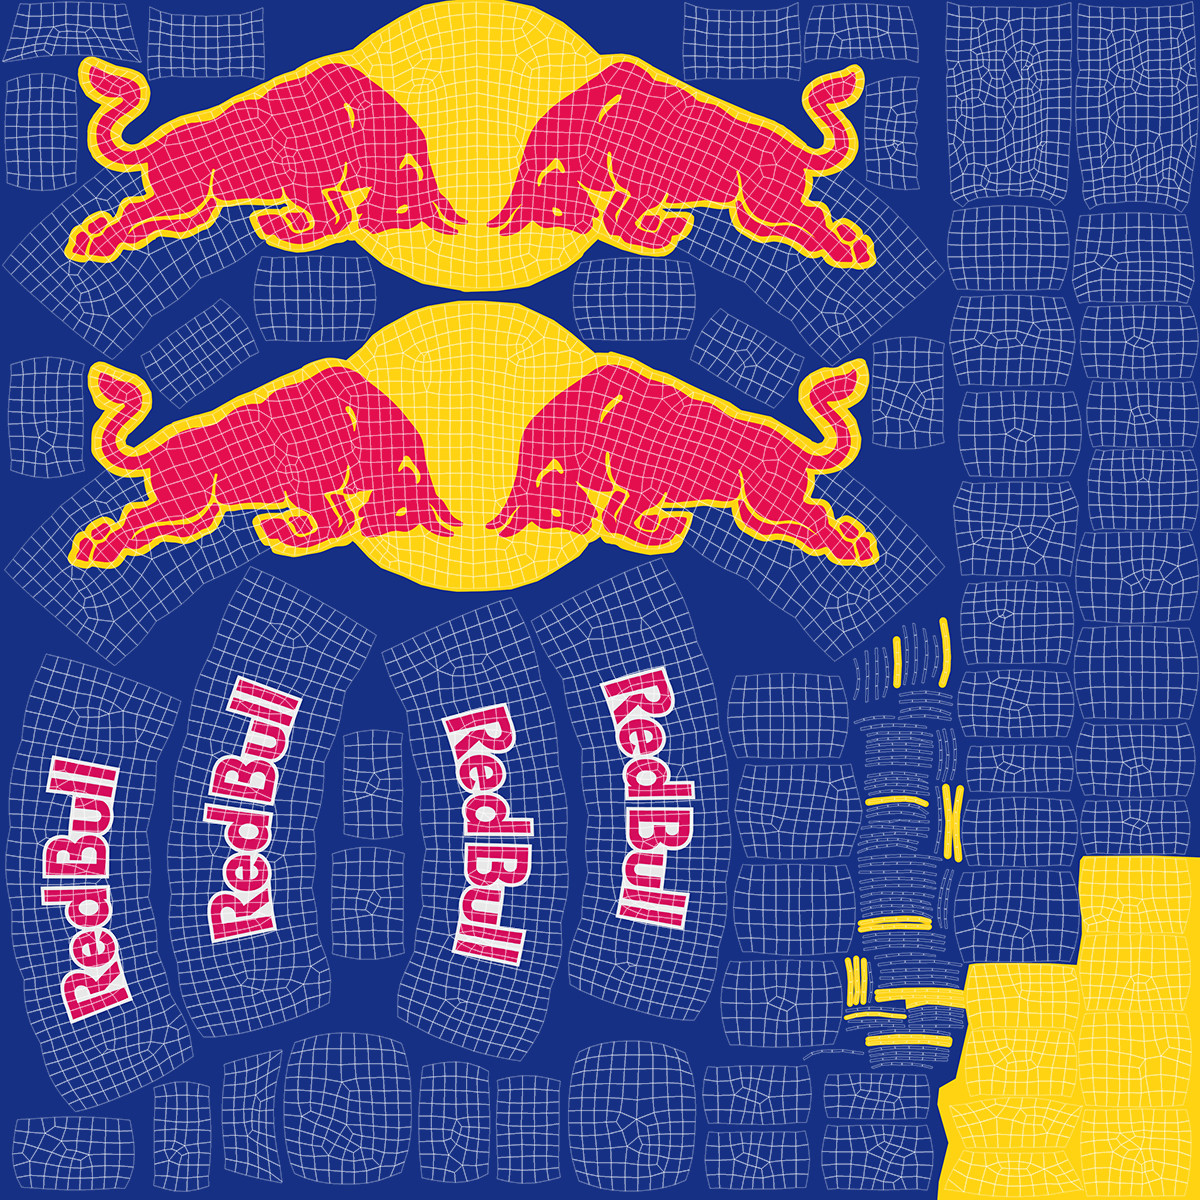 1,758 Red Bull Stickers Images, Stock Photos, 3D objects, & Vectors